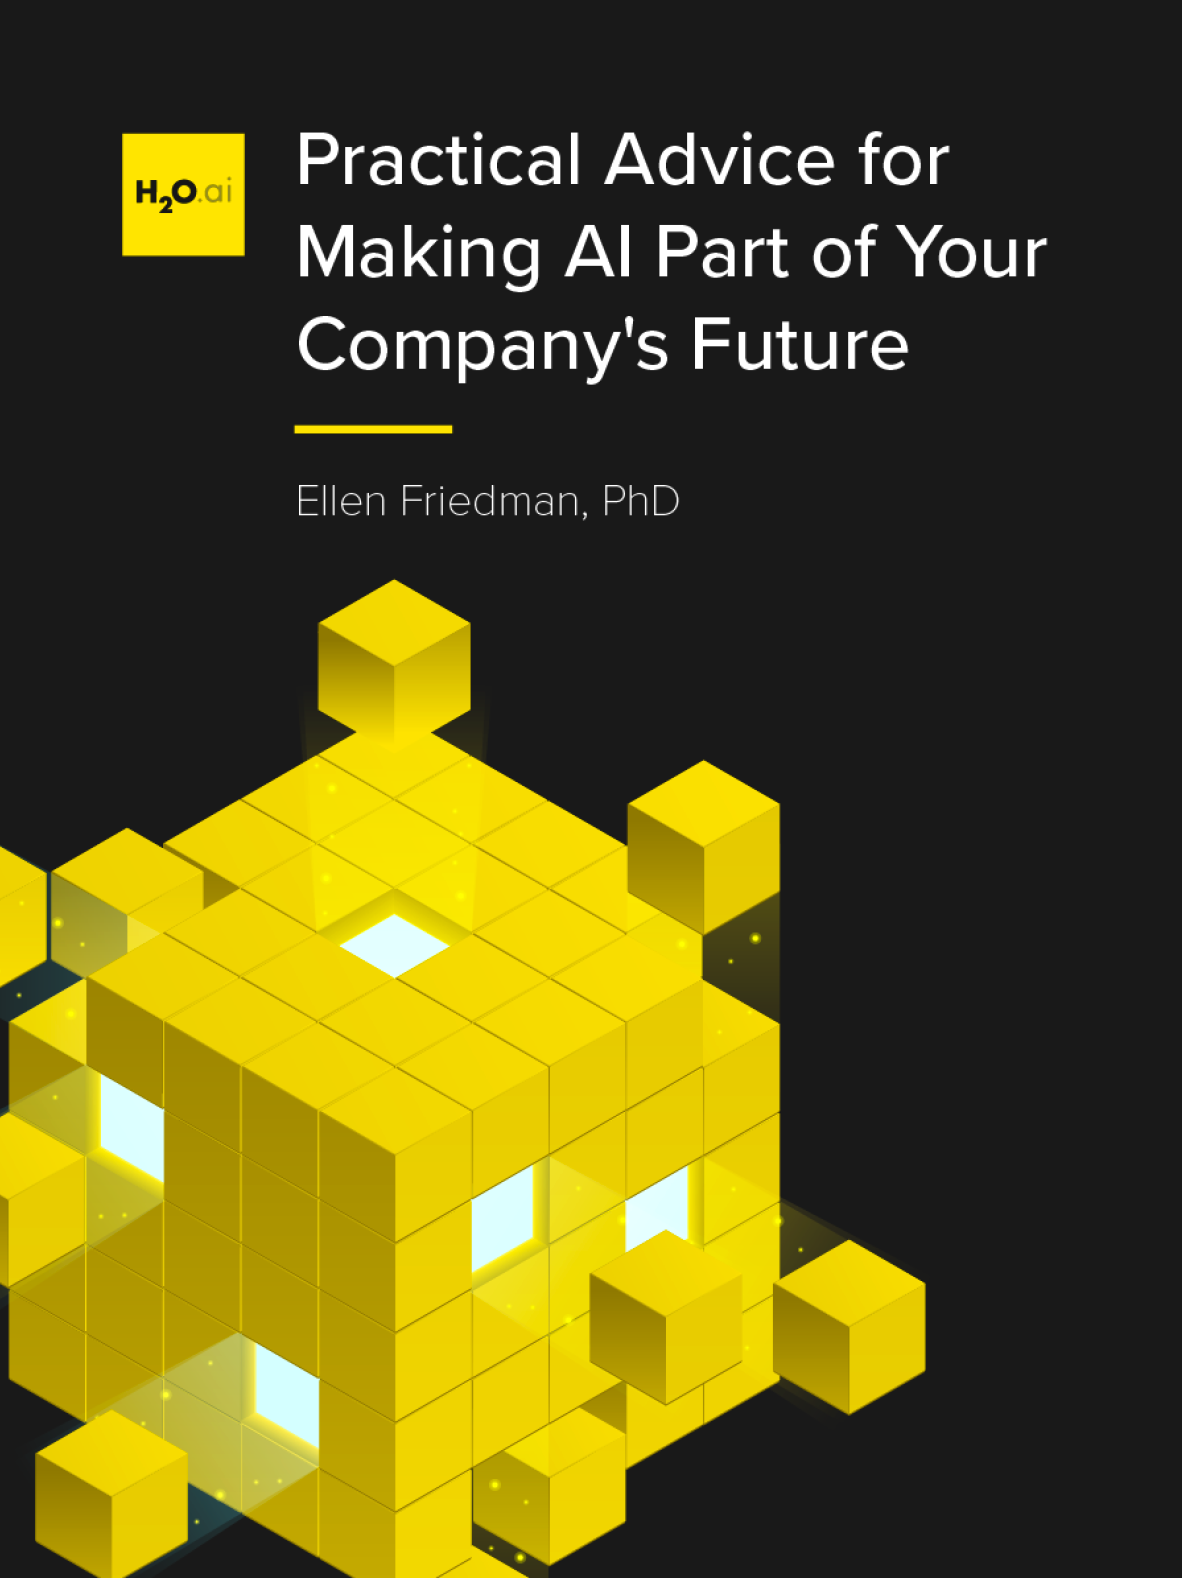 Practical Advice for Making AI Part of Your Company's Future